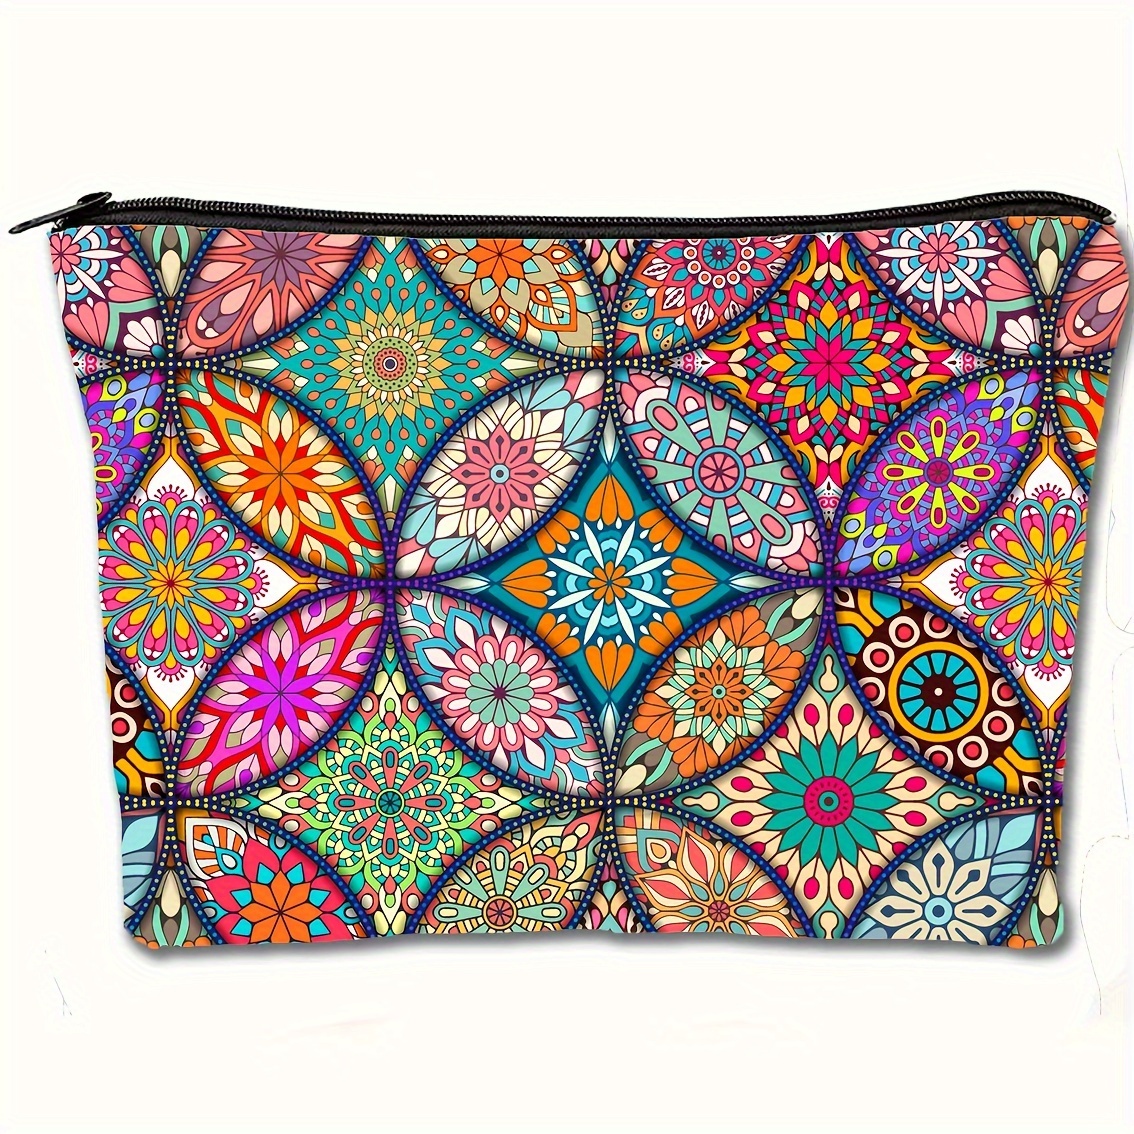 

Boho Chic Large Cosmetic Bag, 6.88x7.25 Inch, Multi-colored Mandala Pattern, Waterproof Makeup Pouch, Zippered Toiletry Organizer, Ideal Women's Travel Accessory For Christmas Gift